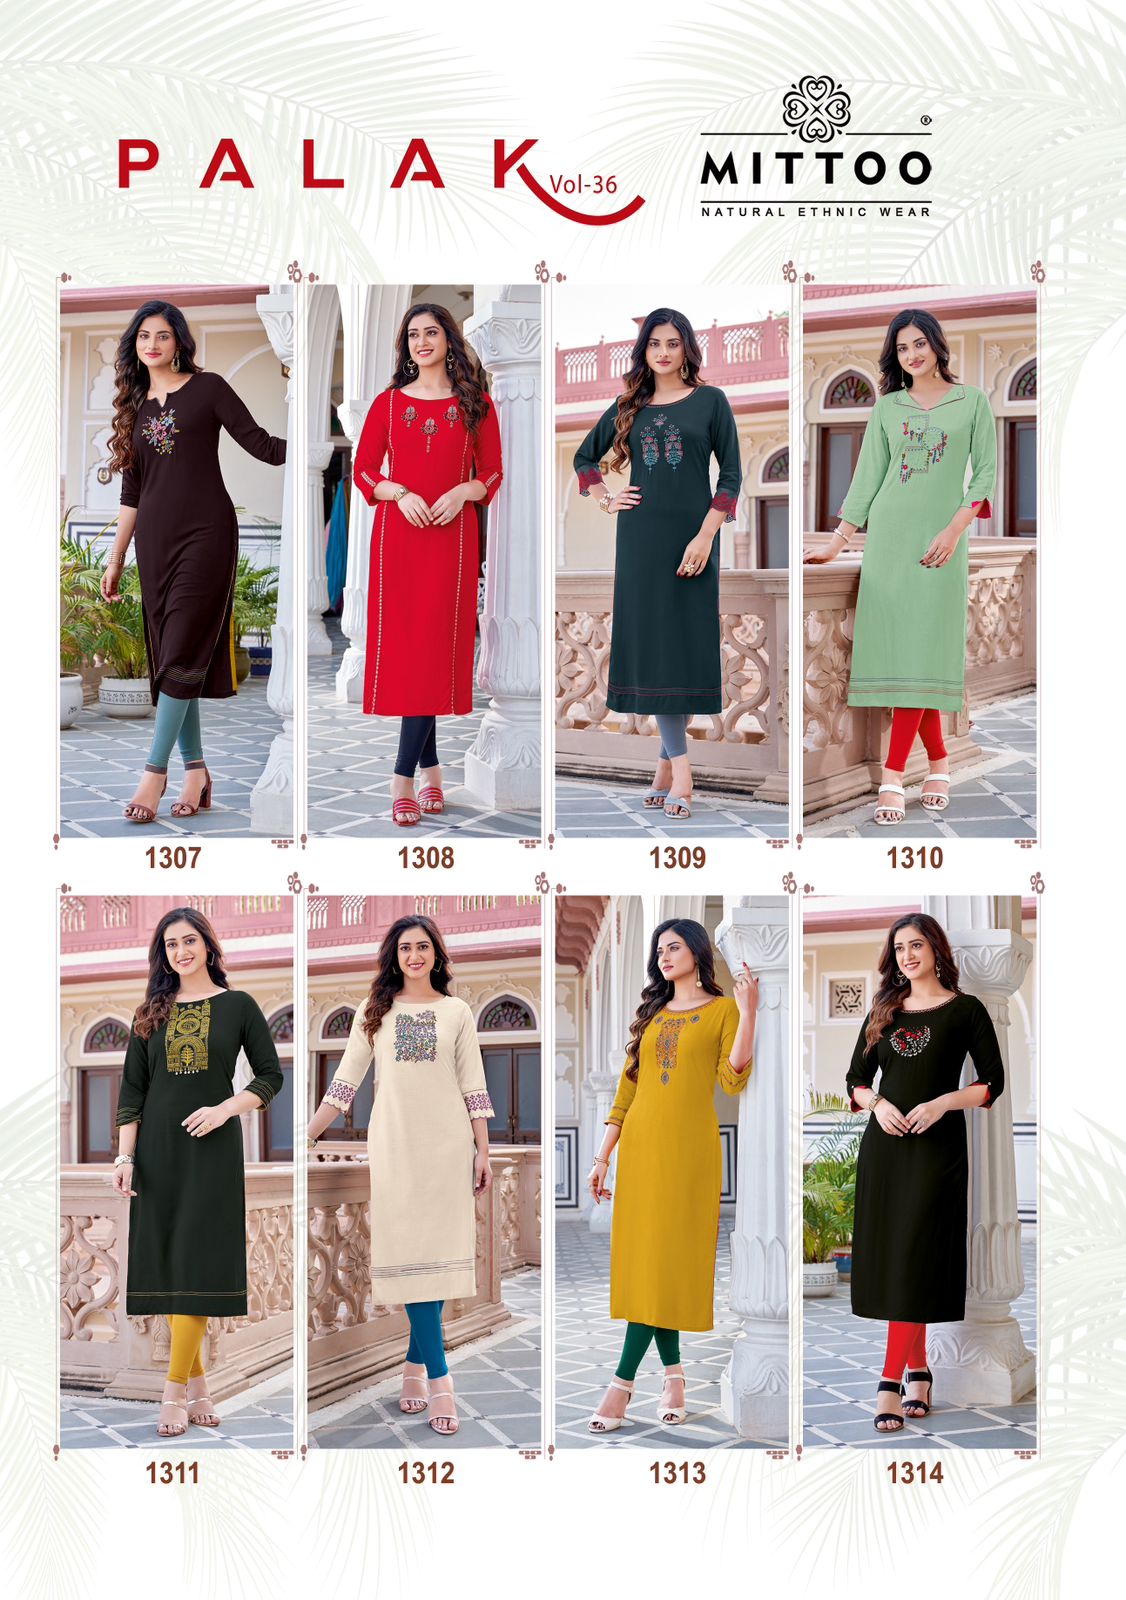 Mittoo Palak Vol 36 collection 9